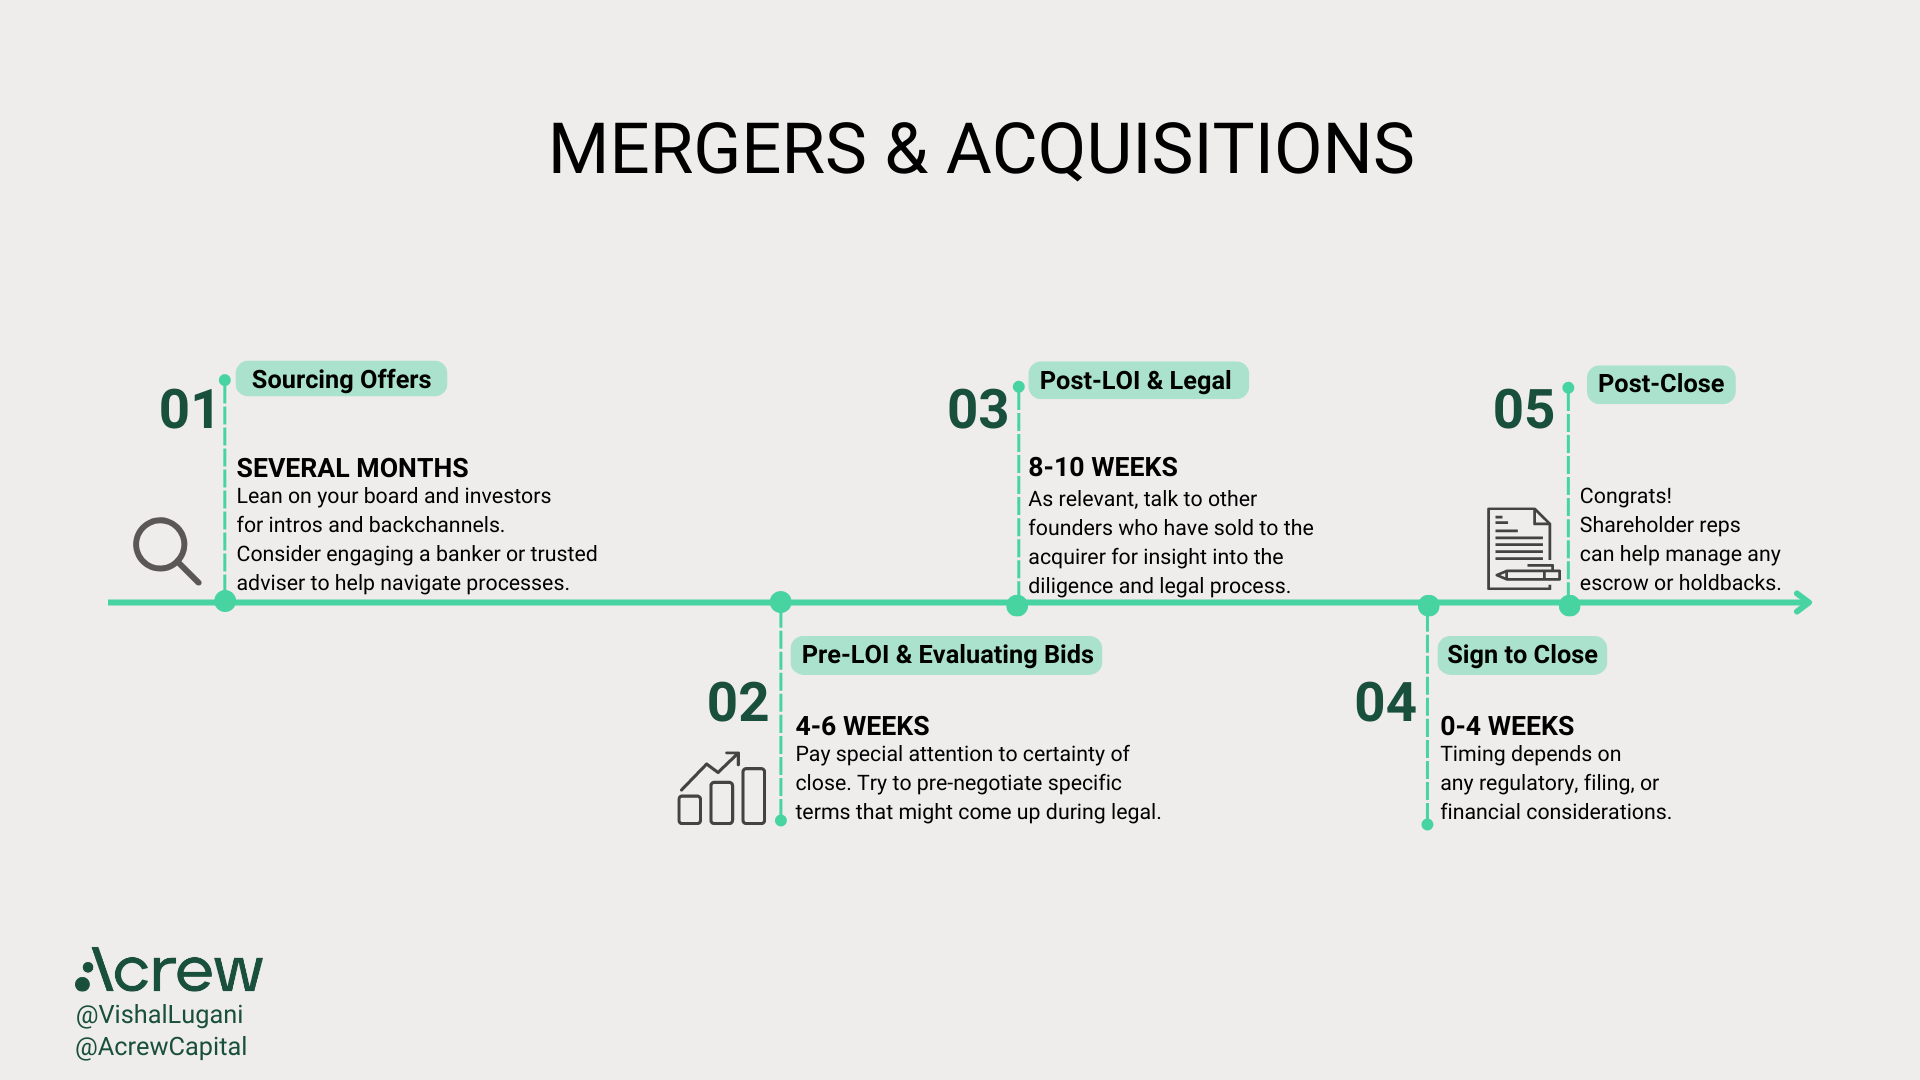 The M&A timeline